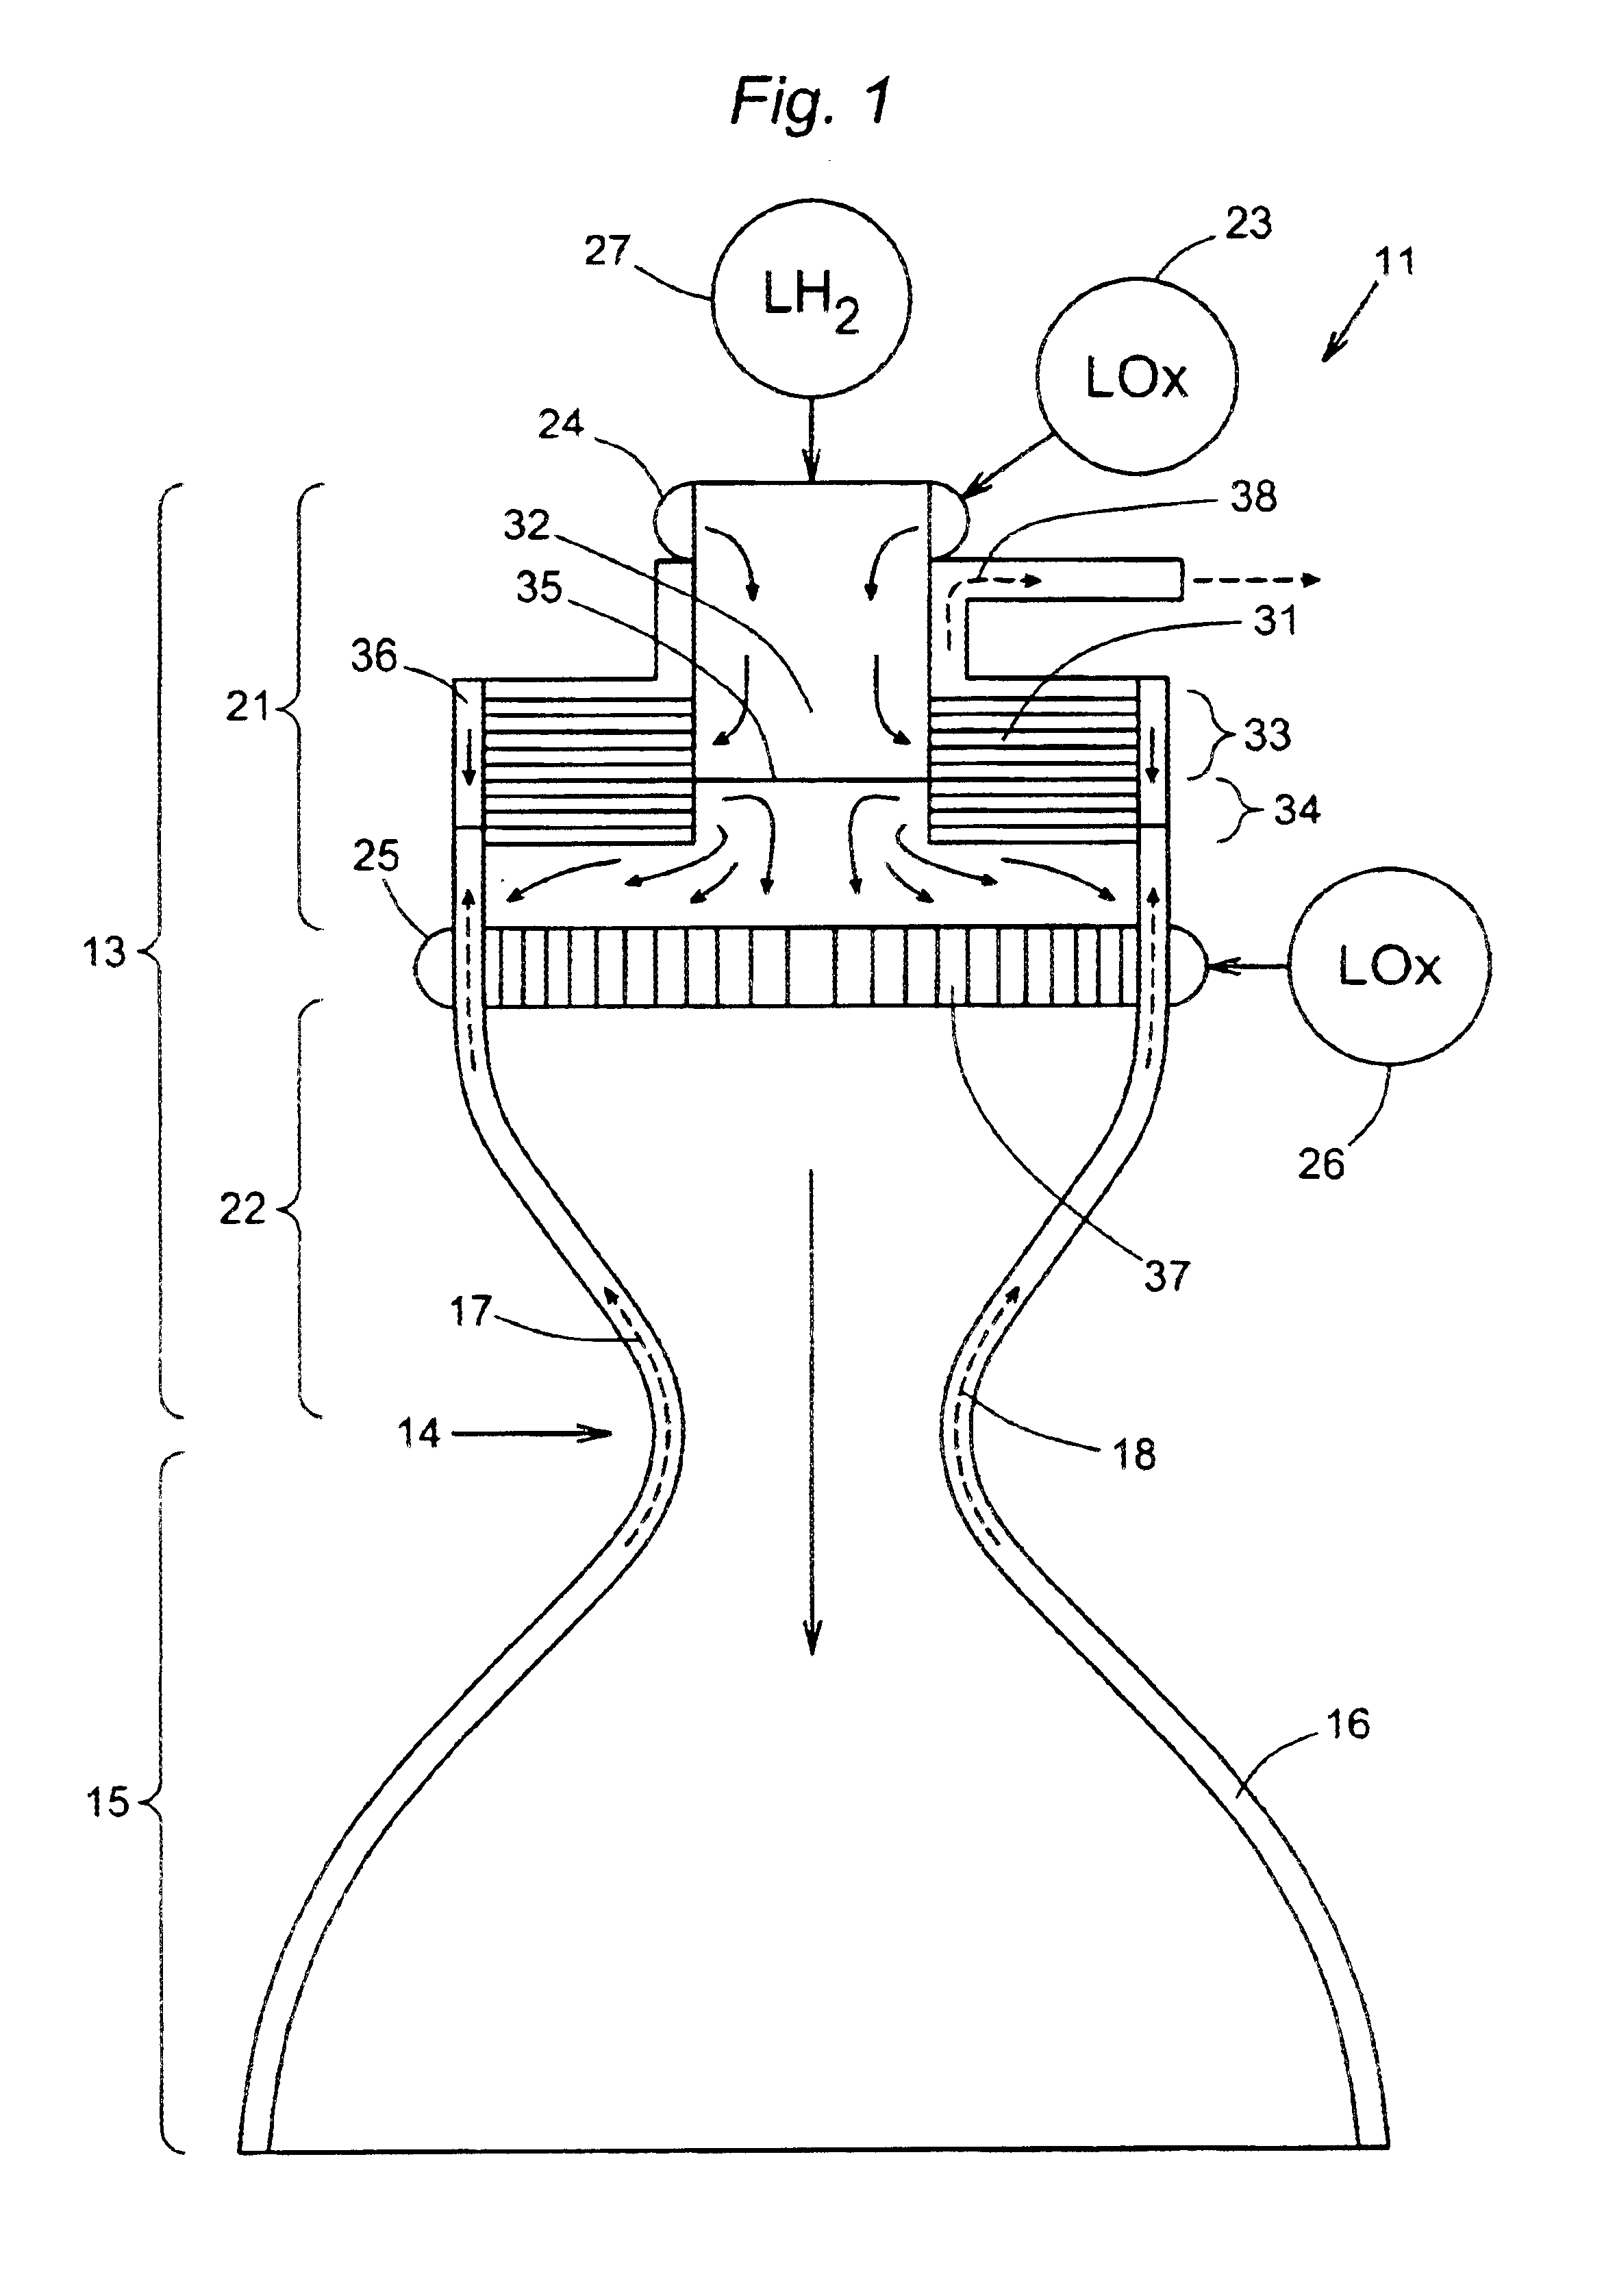 Expander cycle rocket engine with staged combustion and heat exchange